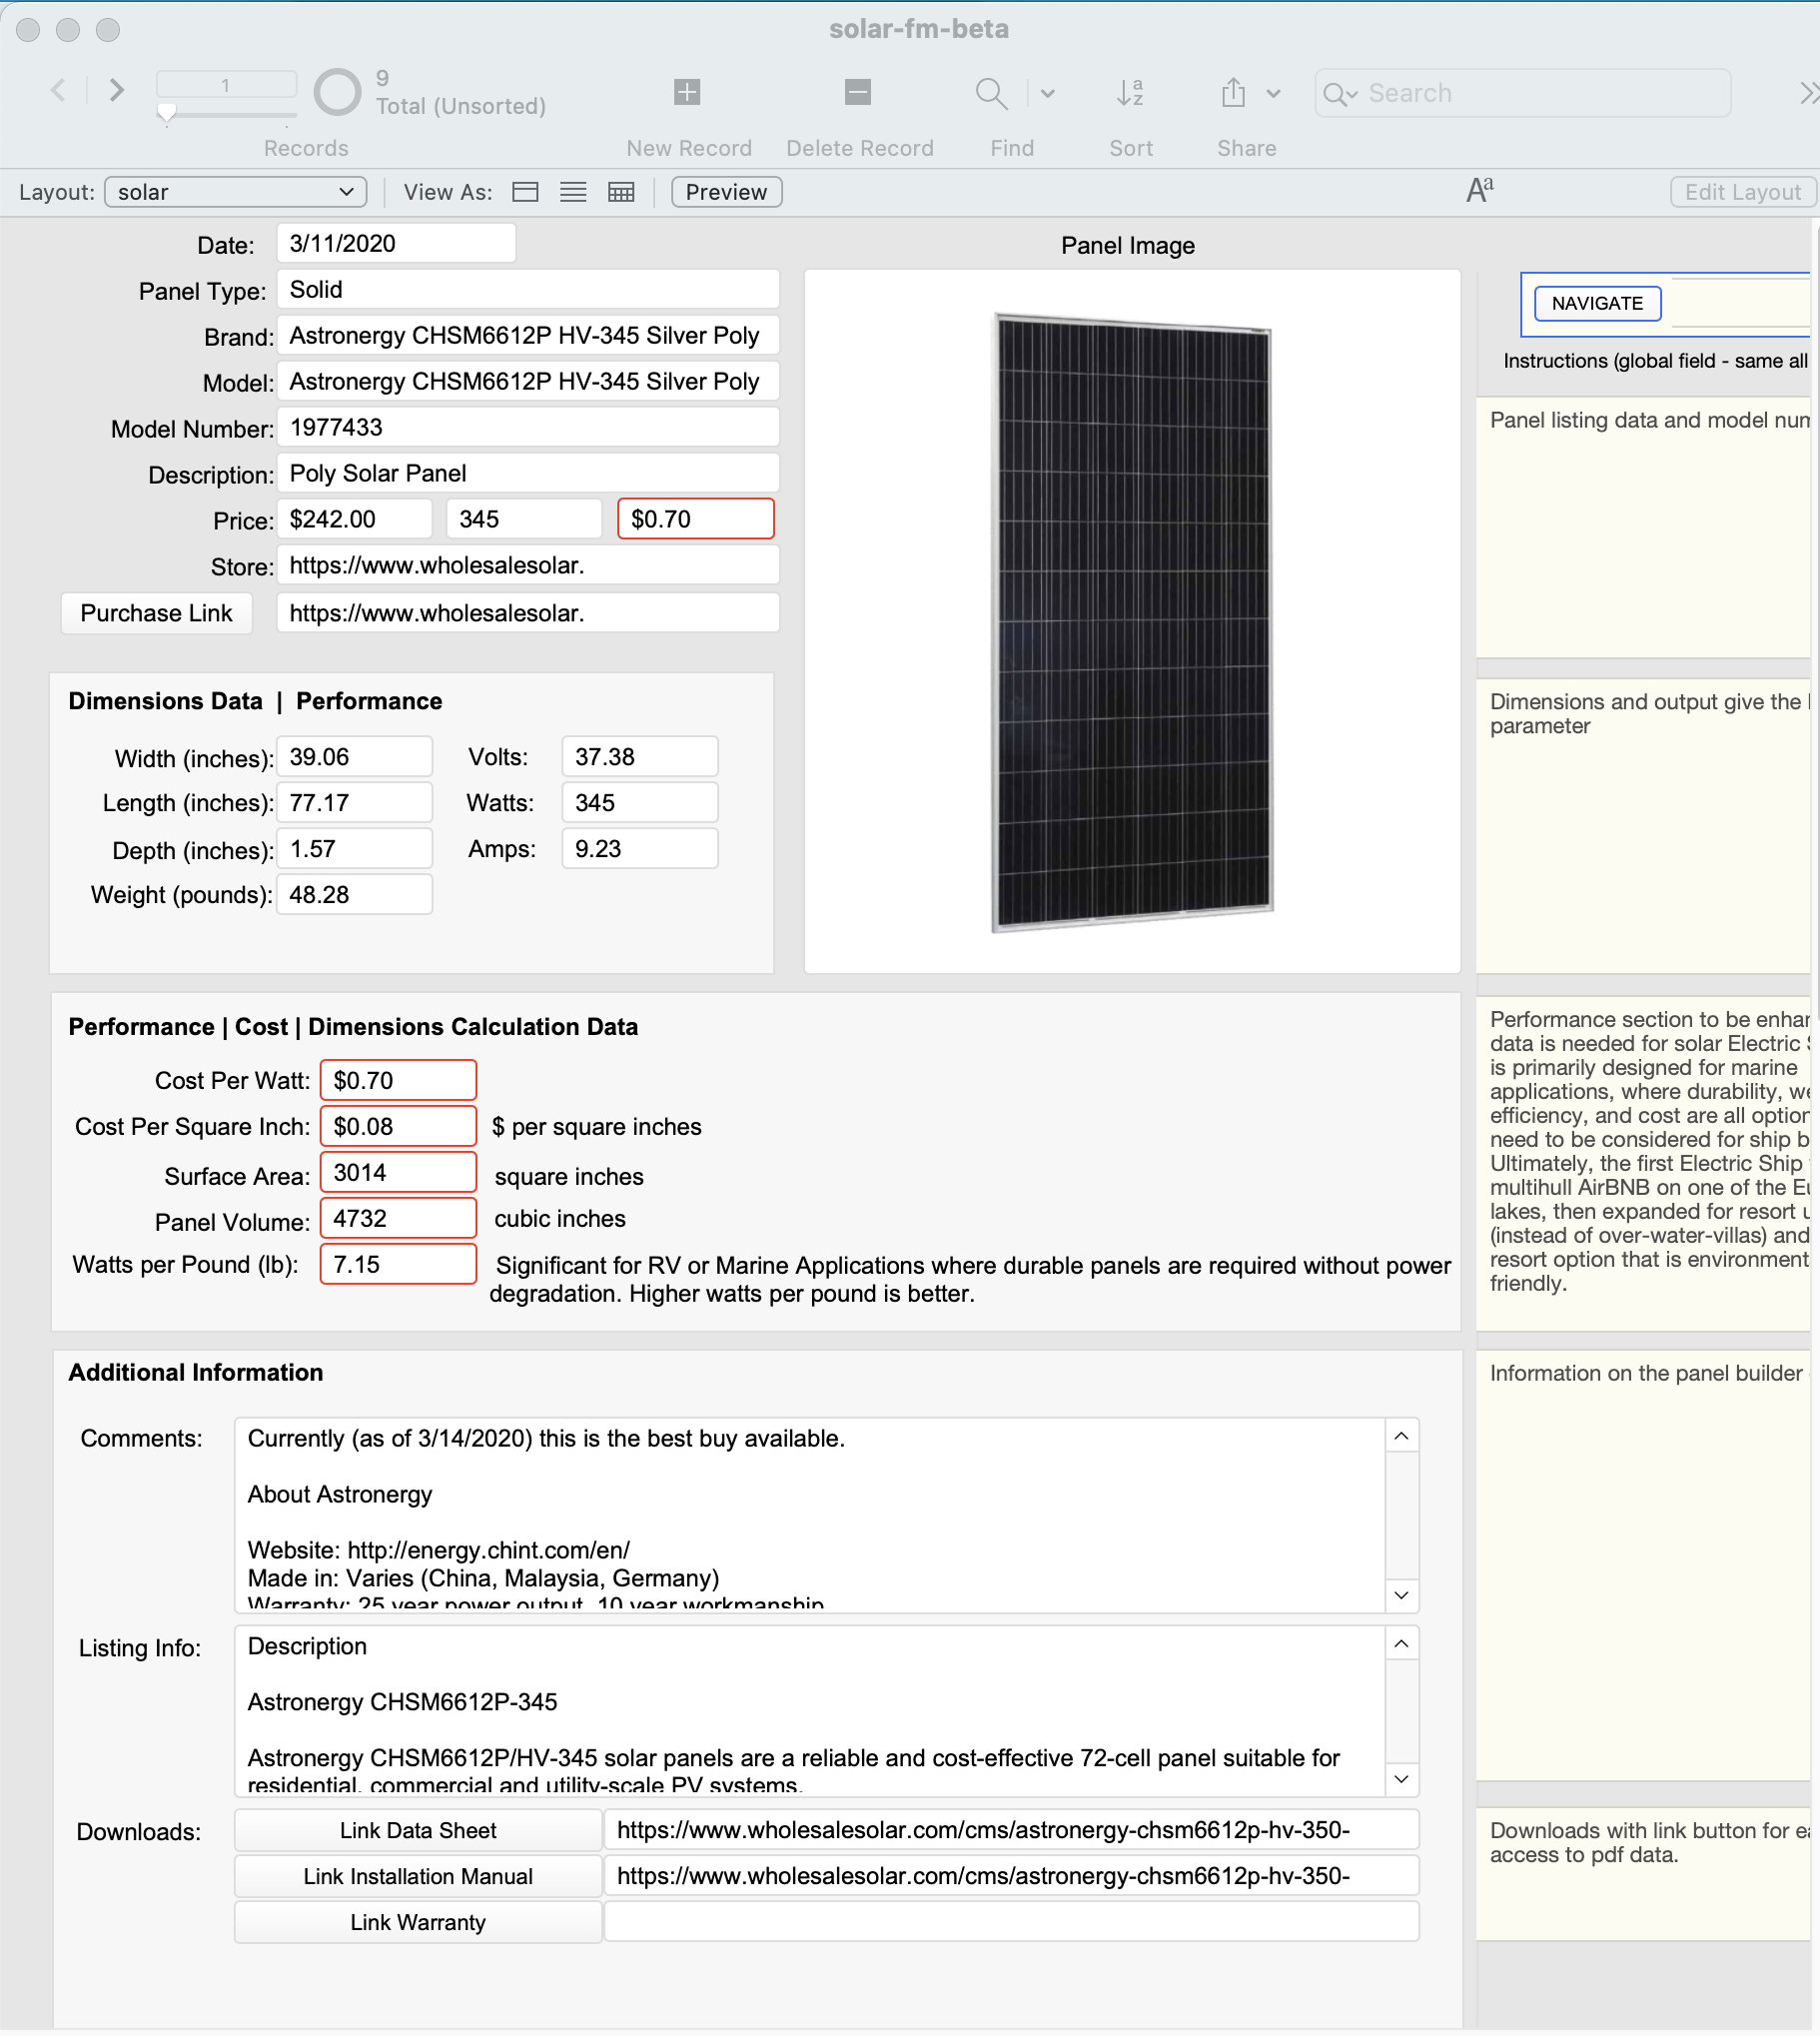 Solar Panel Cost and Performance Filemaker Solution Calculator